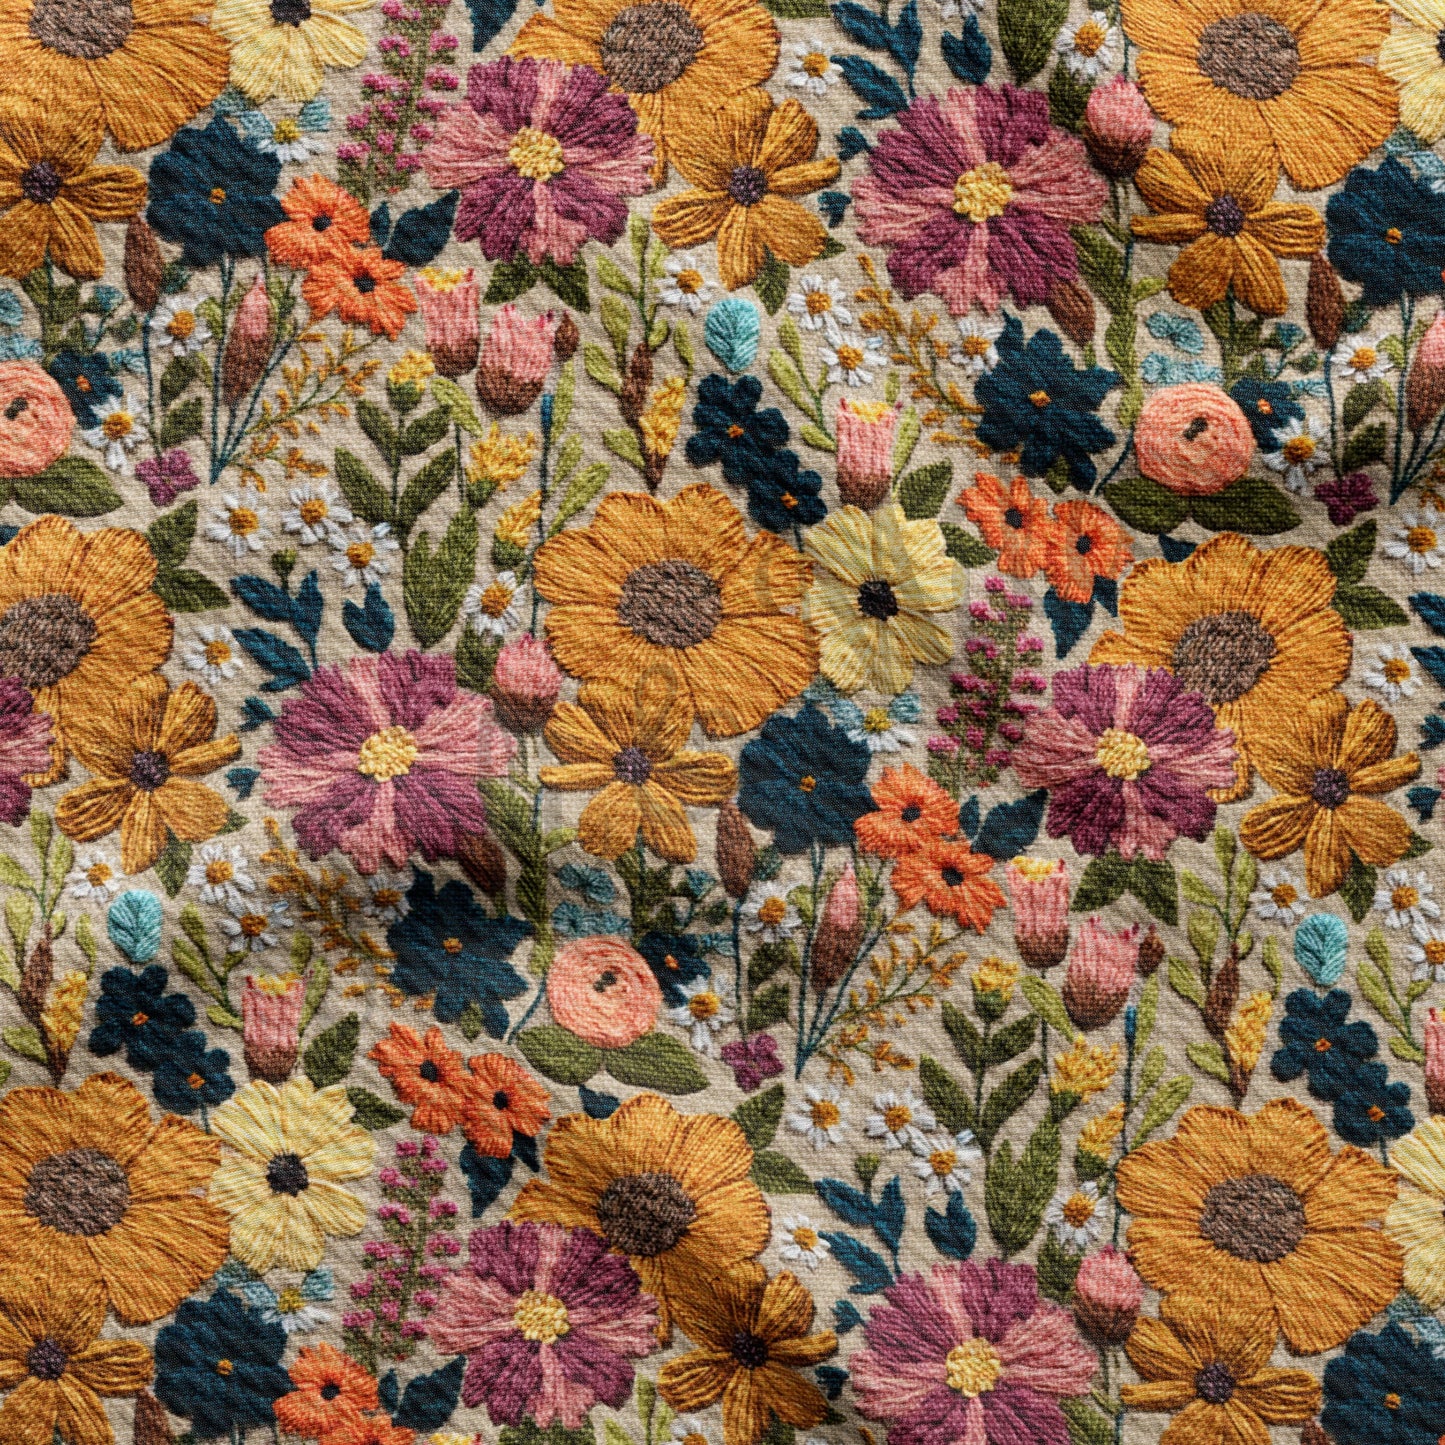 Embroidery Floral  Bullet Textured Fabric by the yard Fabric AA1702